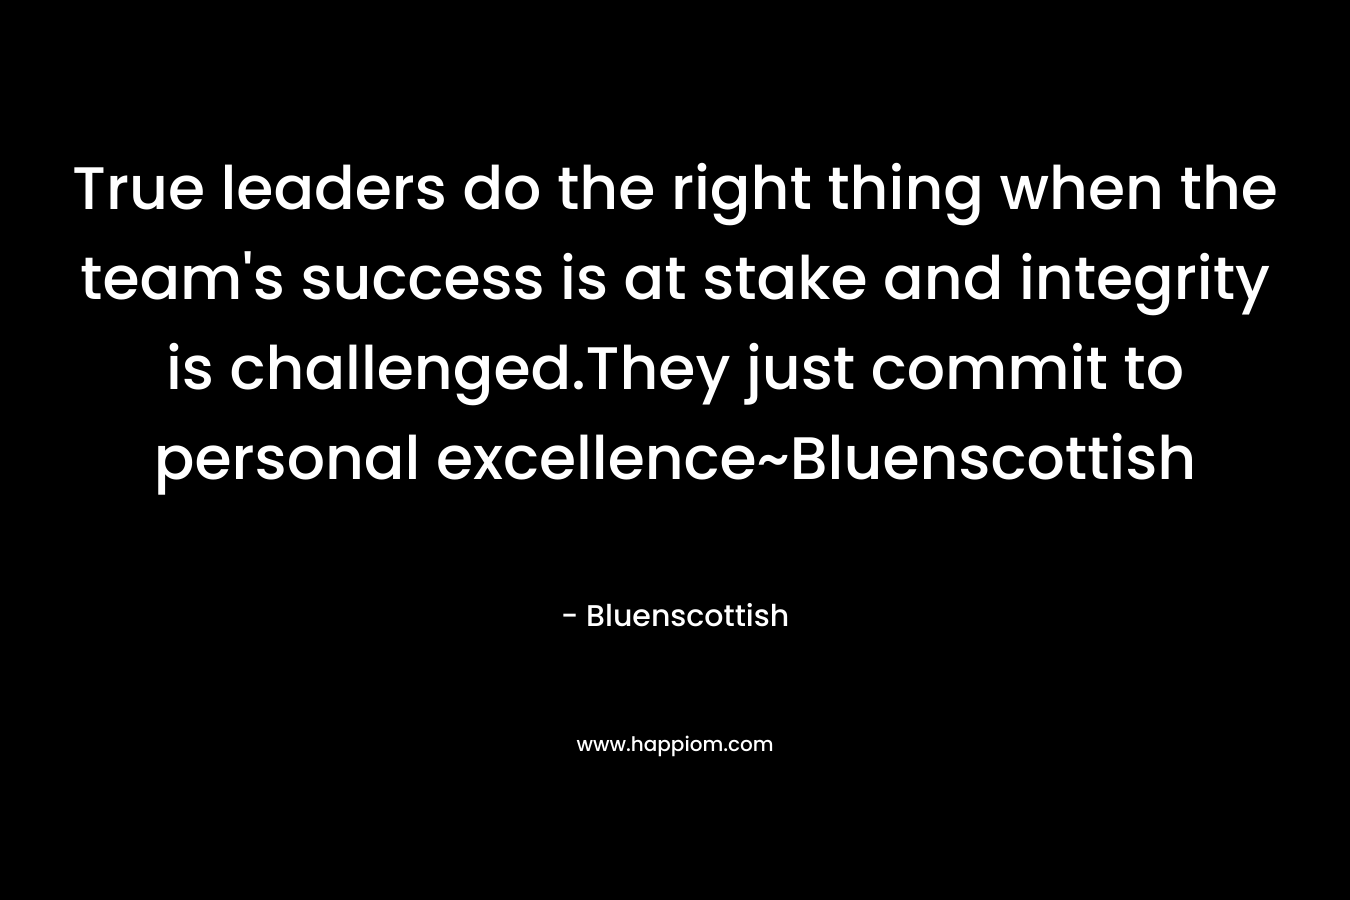 True leaders do the right thing when the team's success is at stake and integrity is challenged.They just commit to personal excellence~Bluenscottish